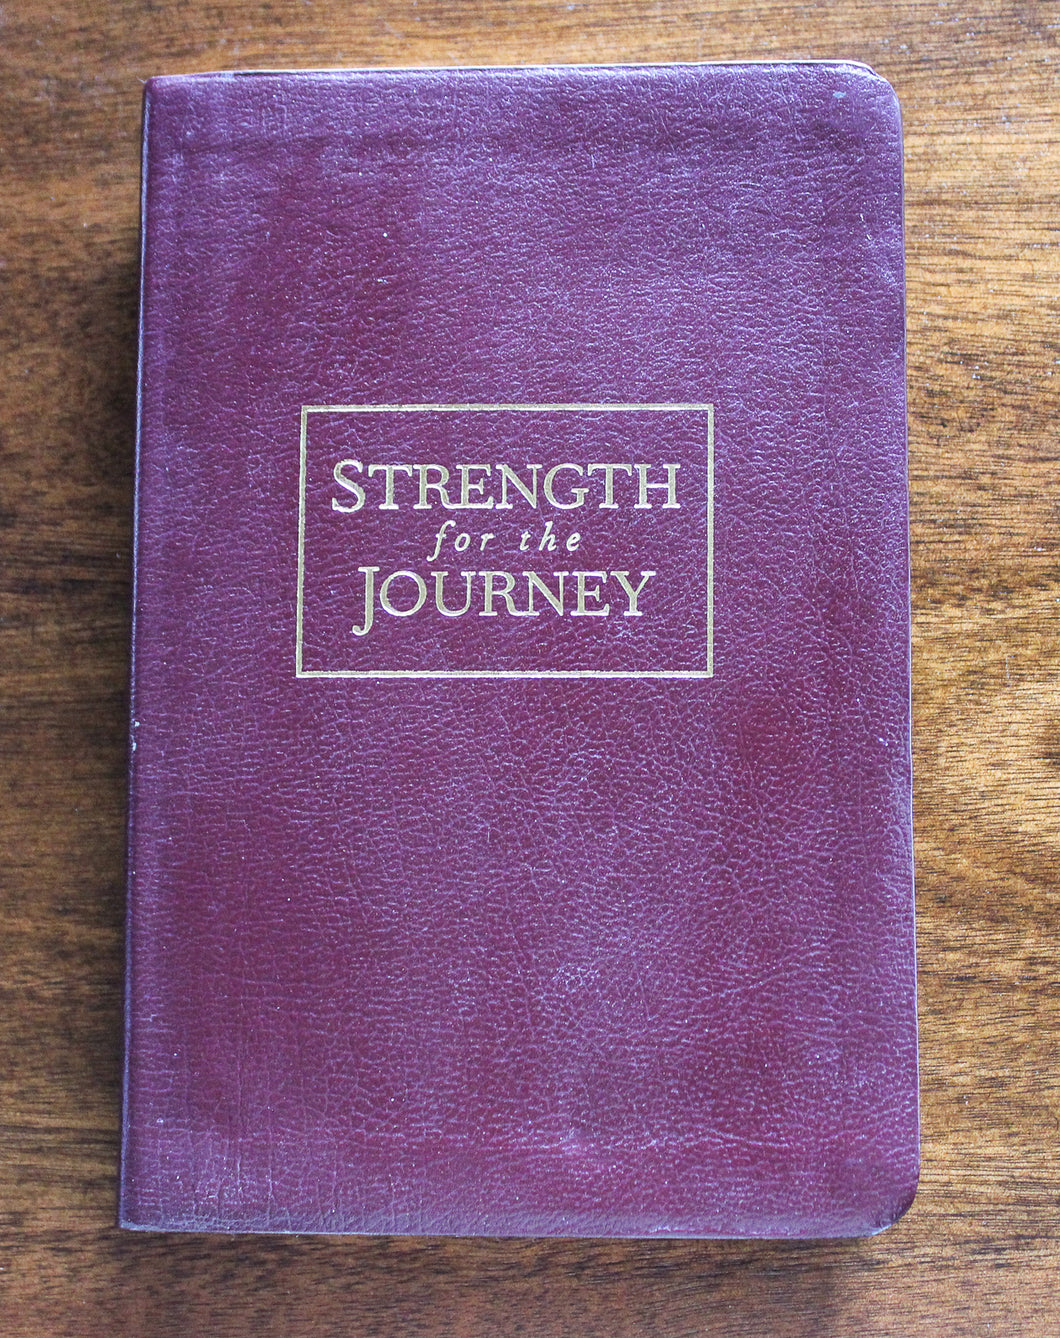 Strength for the Journey 365 Christian Daily Devotional Book by Joseph M Stowell